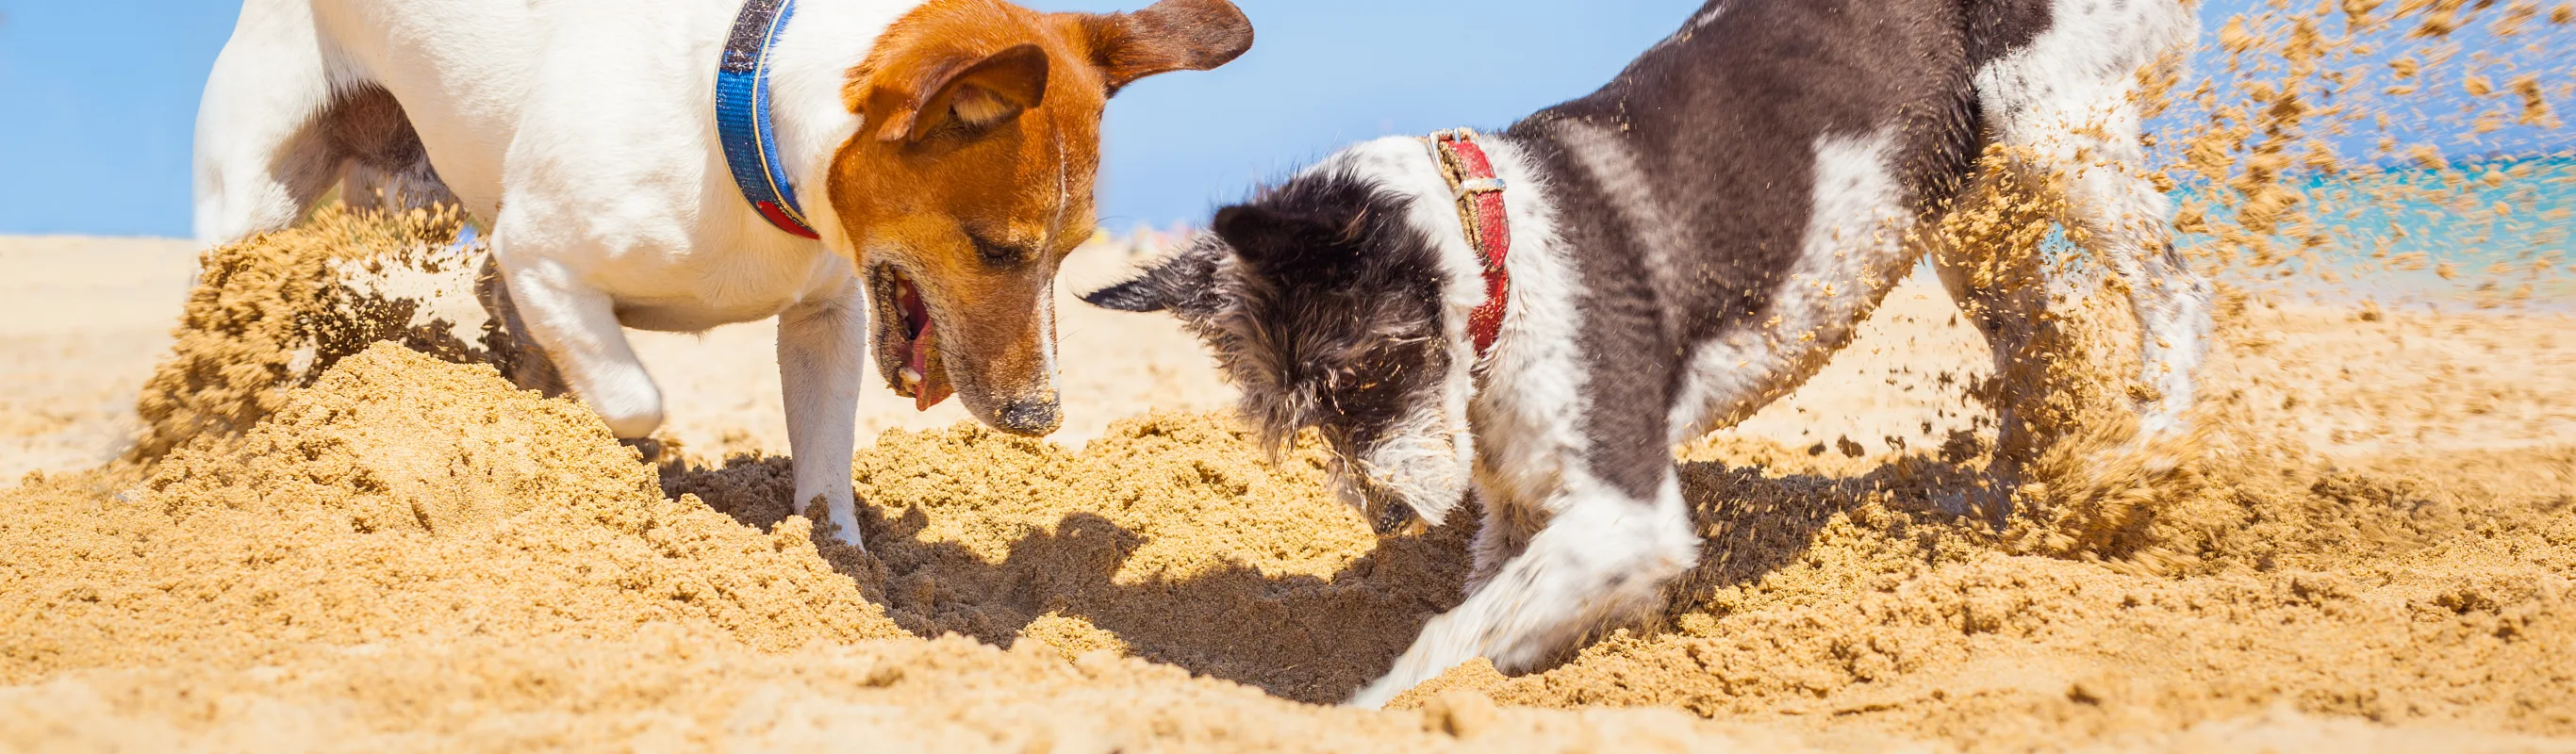 two dogs digging a hole in the sand